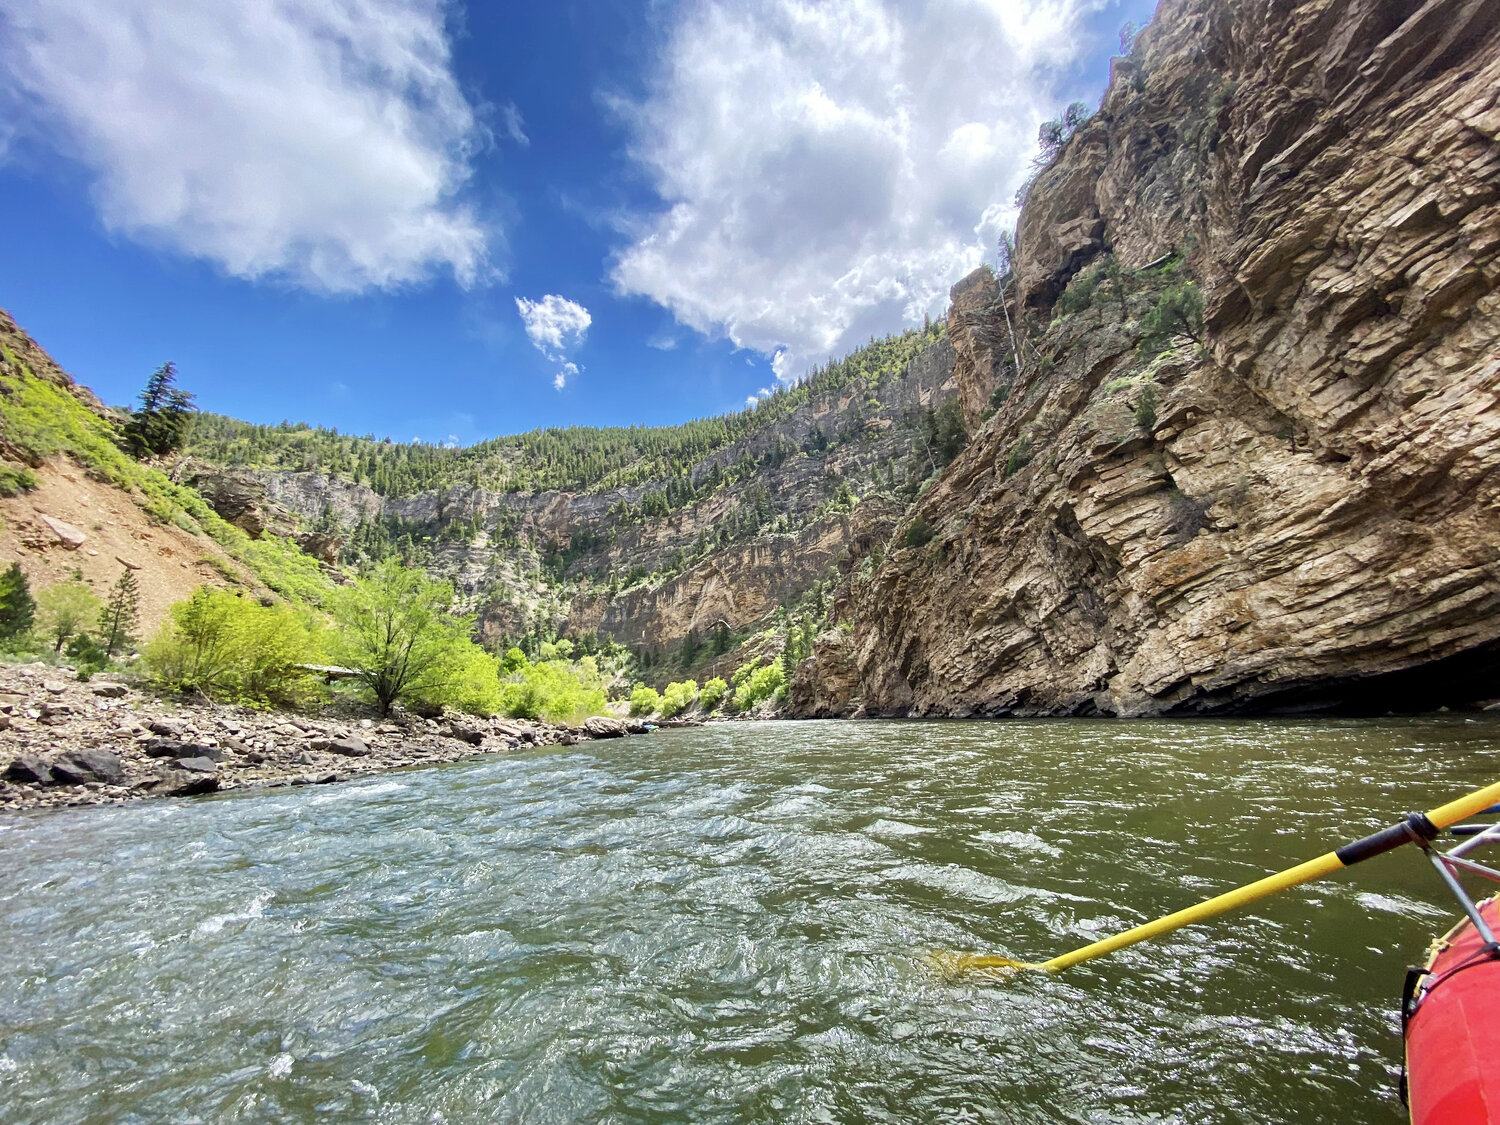 A view of the colorado river while rafting